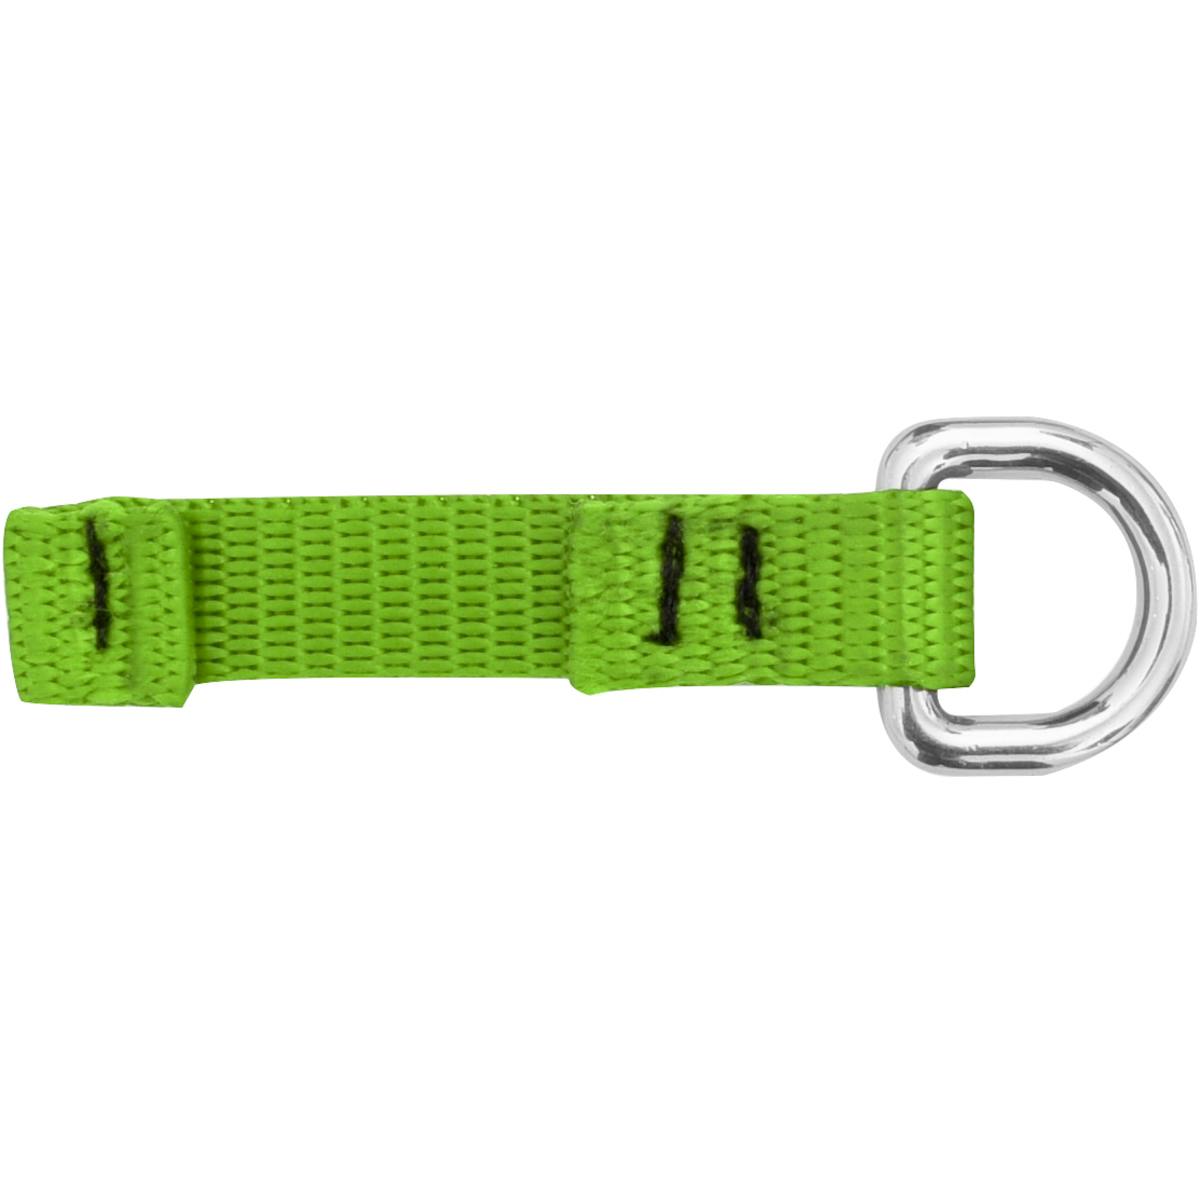 Tool Tethering Kit - includes single leg lanyard, tool connectors, and tool tape - Retail Packed, Green (533-900101) - OS_1